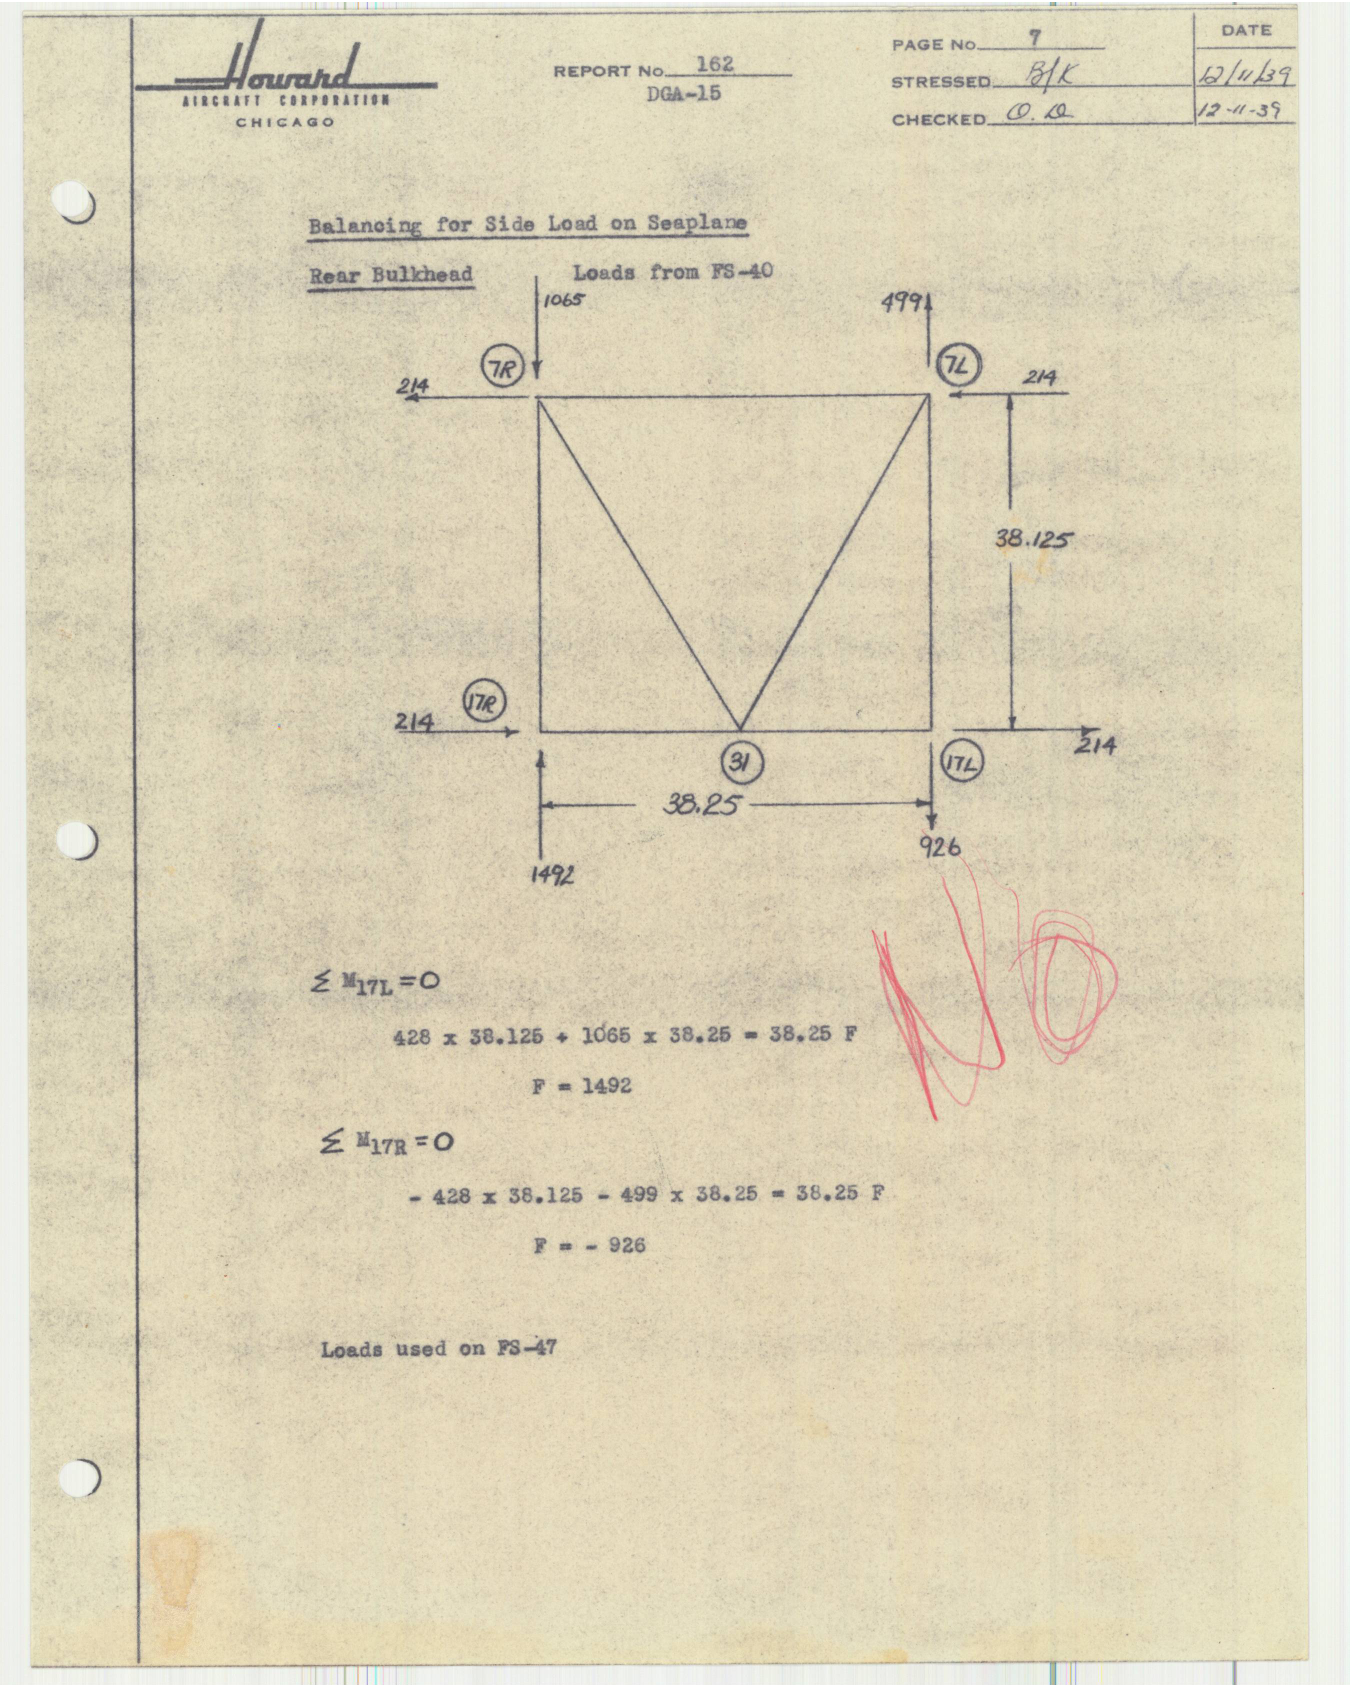 Sample page 44 from AirCorps Library document: Report 162, Fuselage Analysis for Seaplane Landing Conditions, DGA-15S